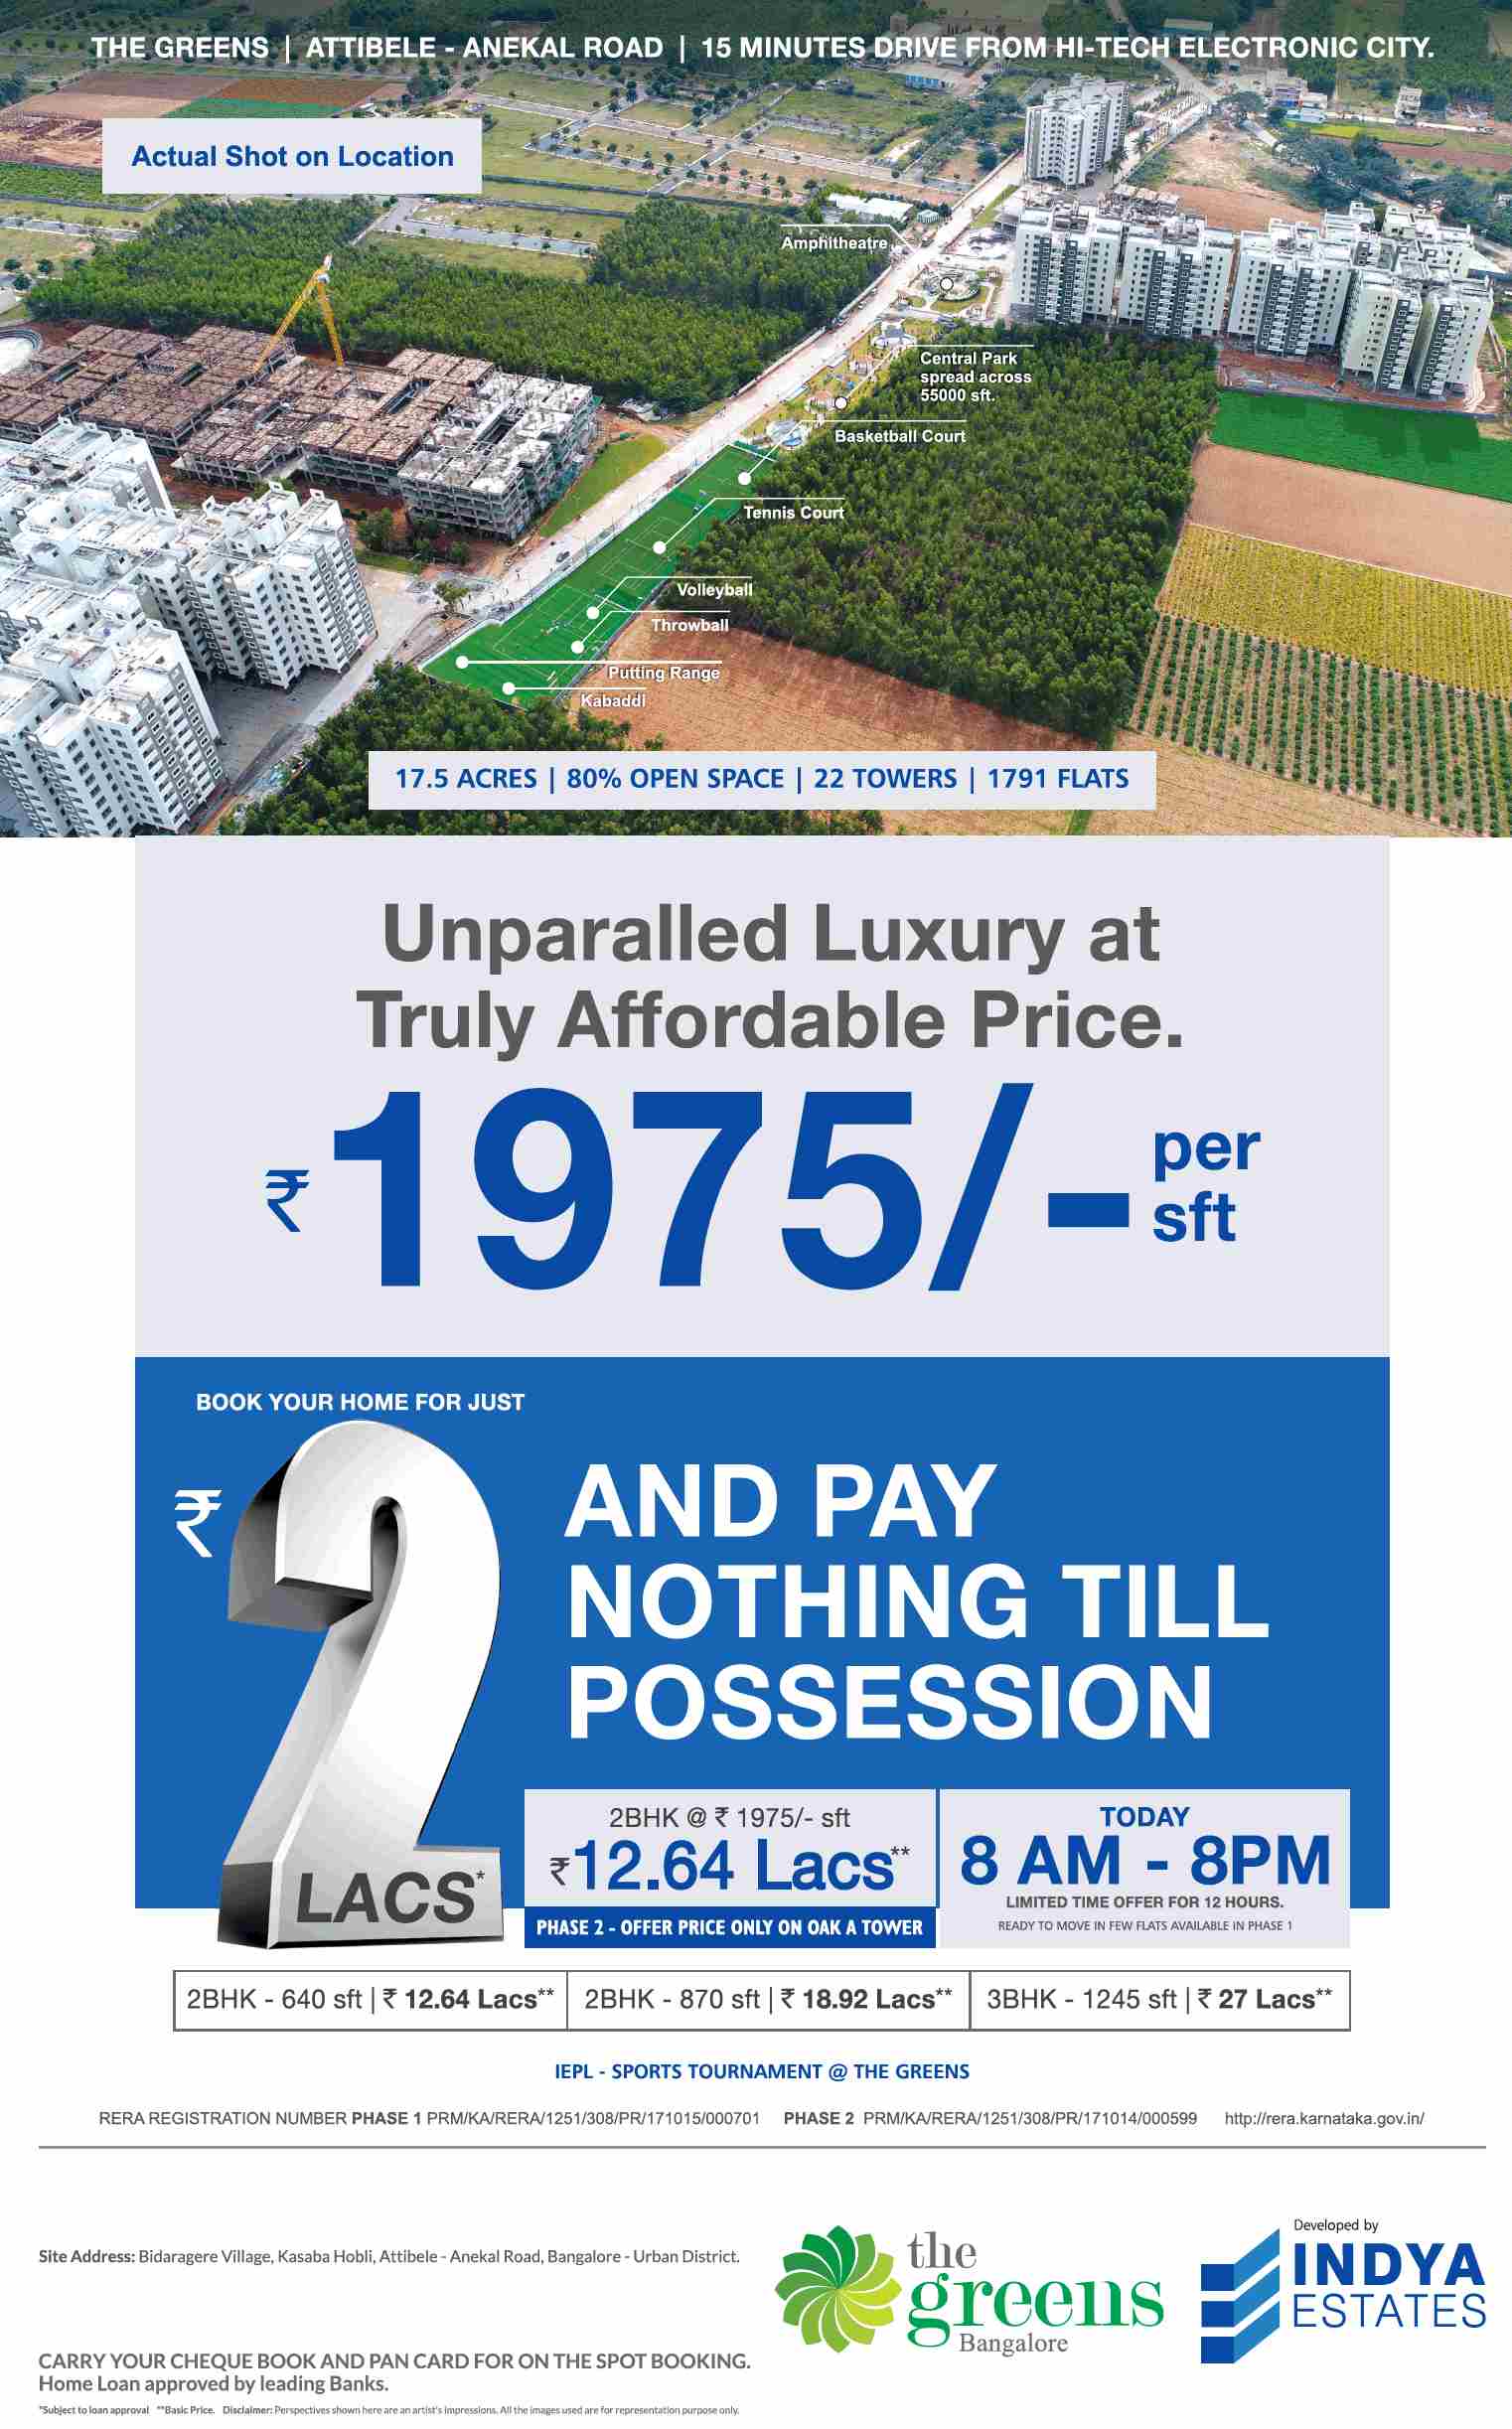 Pay Rs. 2 Lacs and nothing till possession at Indya The Greens in Bangalore Update